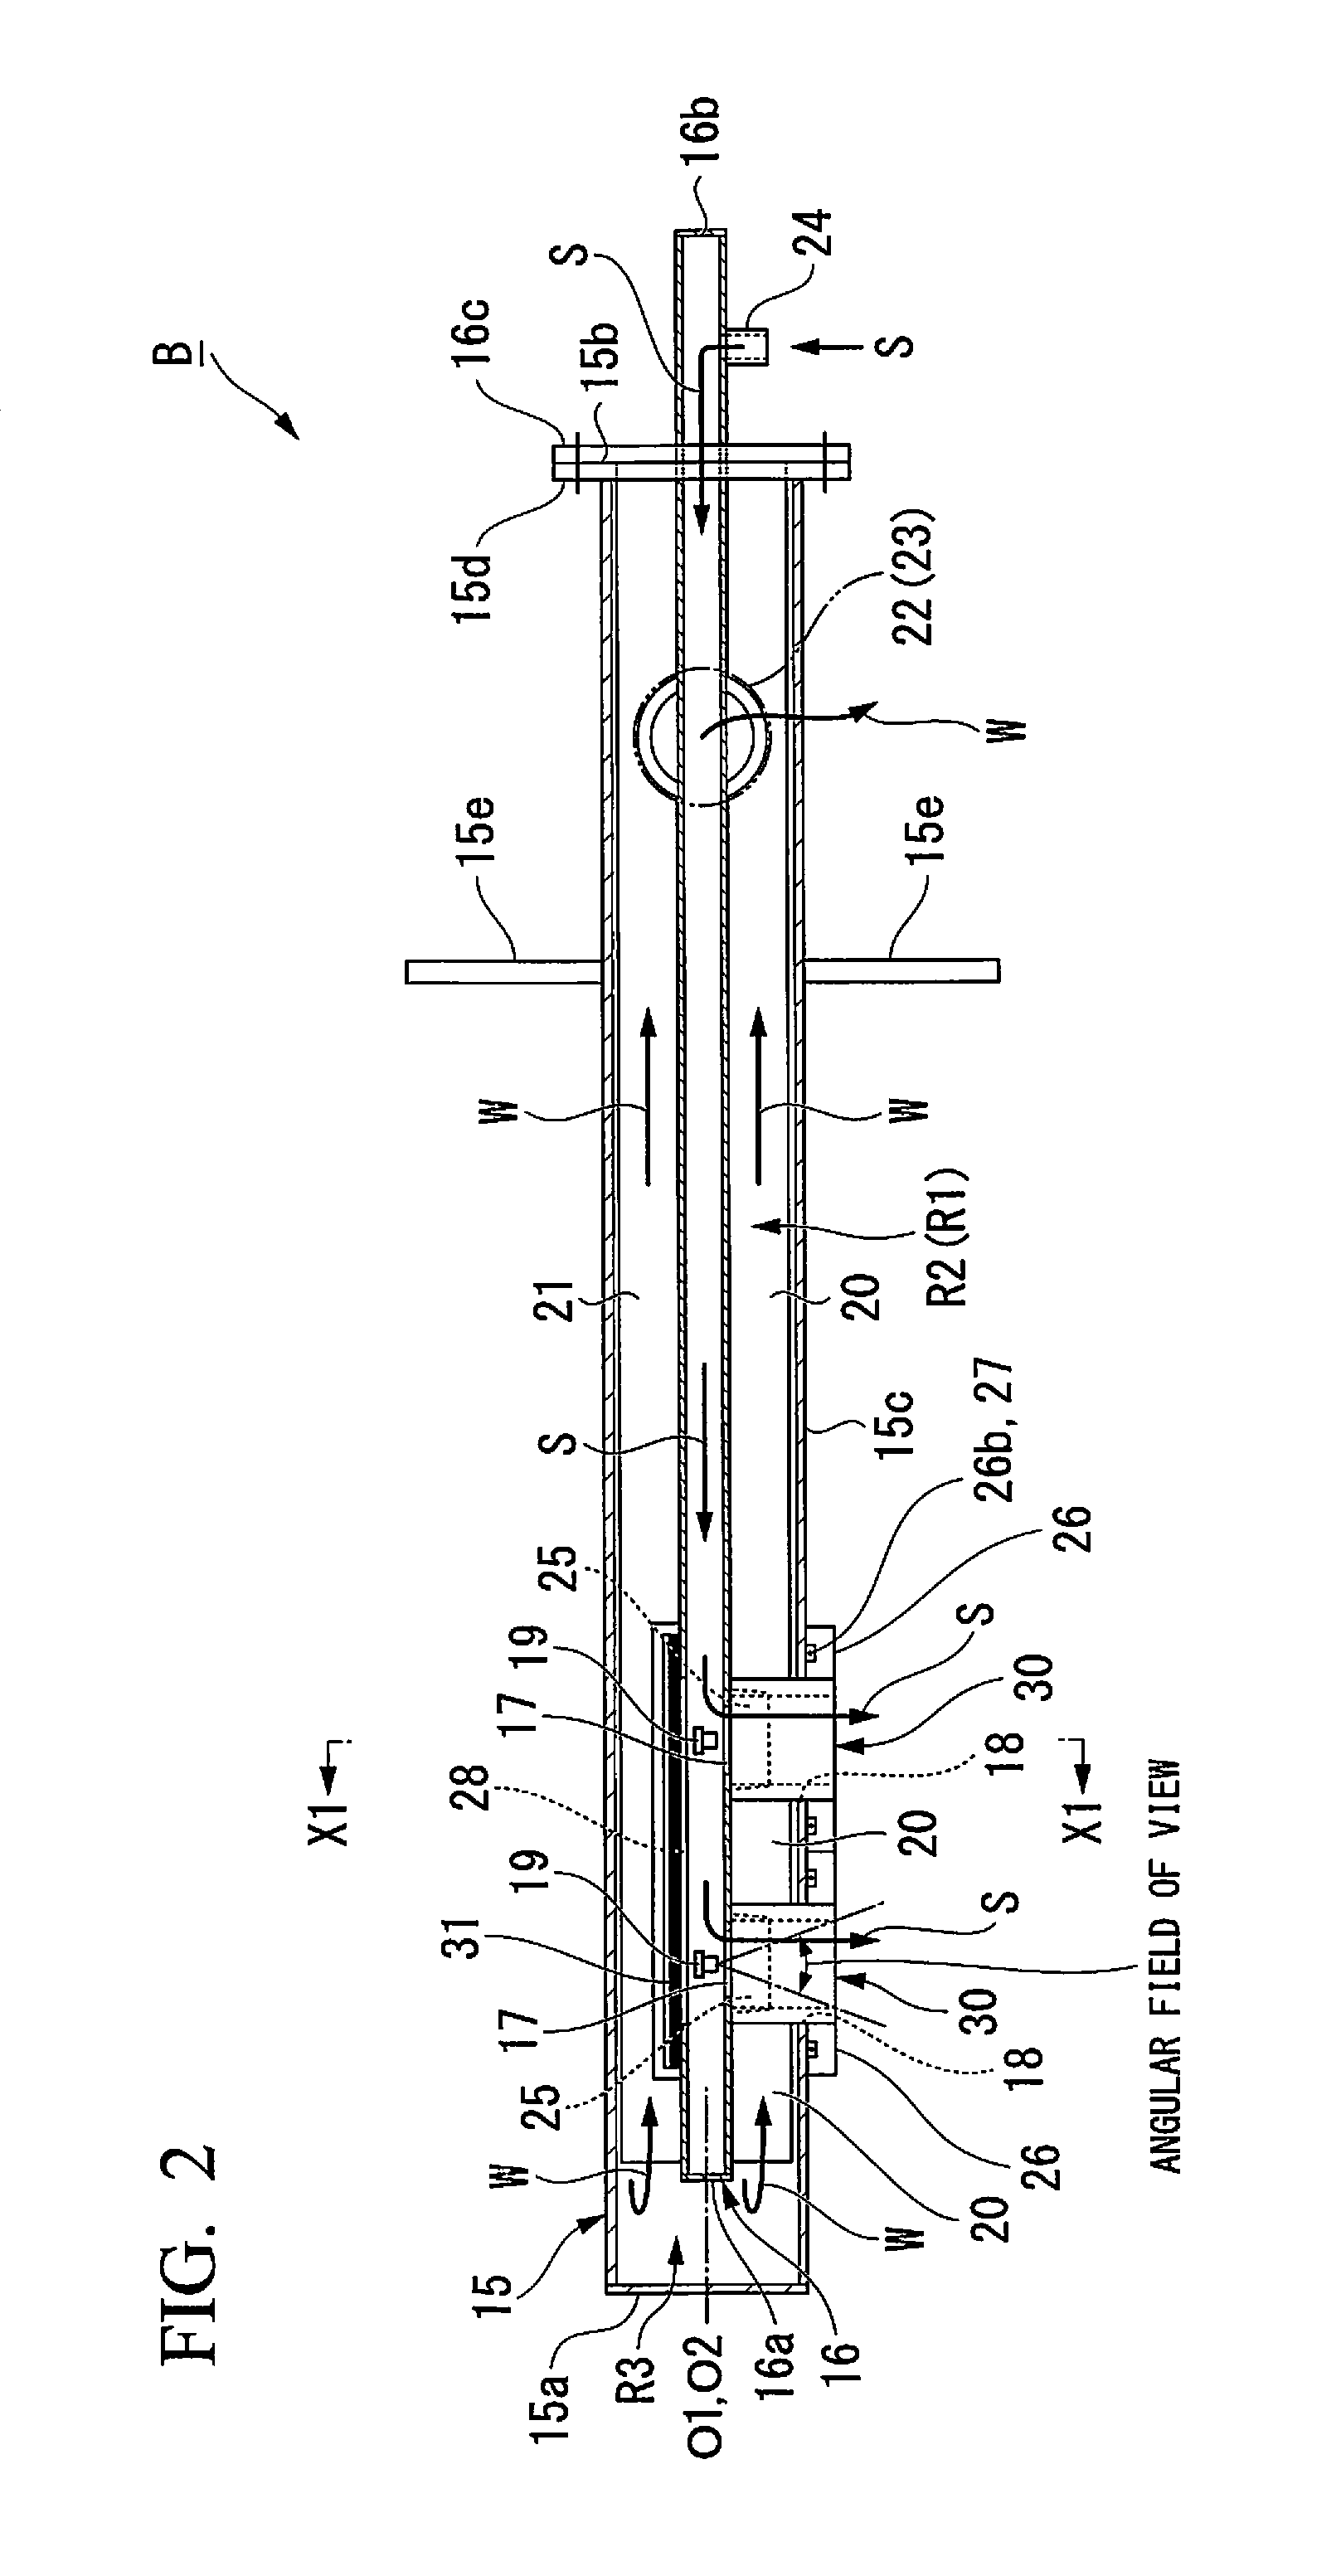 Device for monitoring inside of high-temperature furnace, and system for monitoring inside of high-temperature furnace provided with same